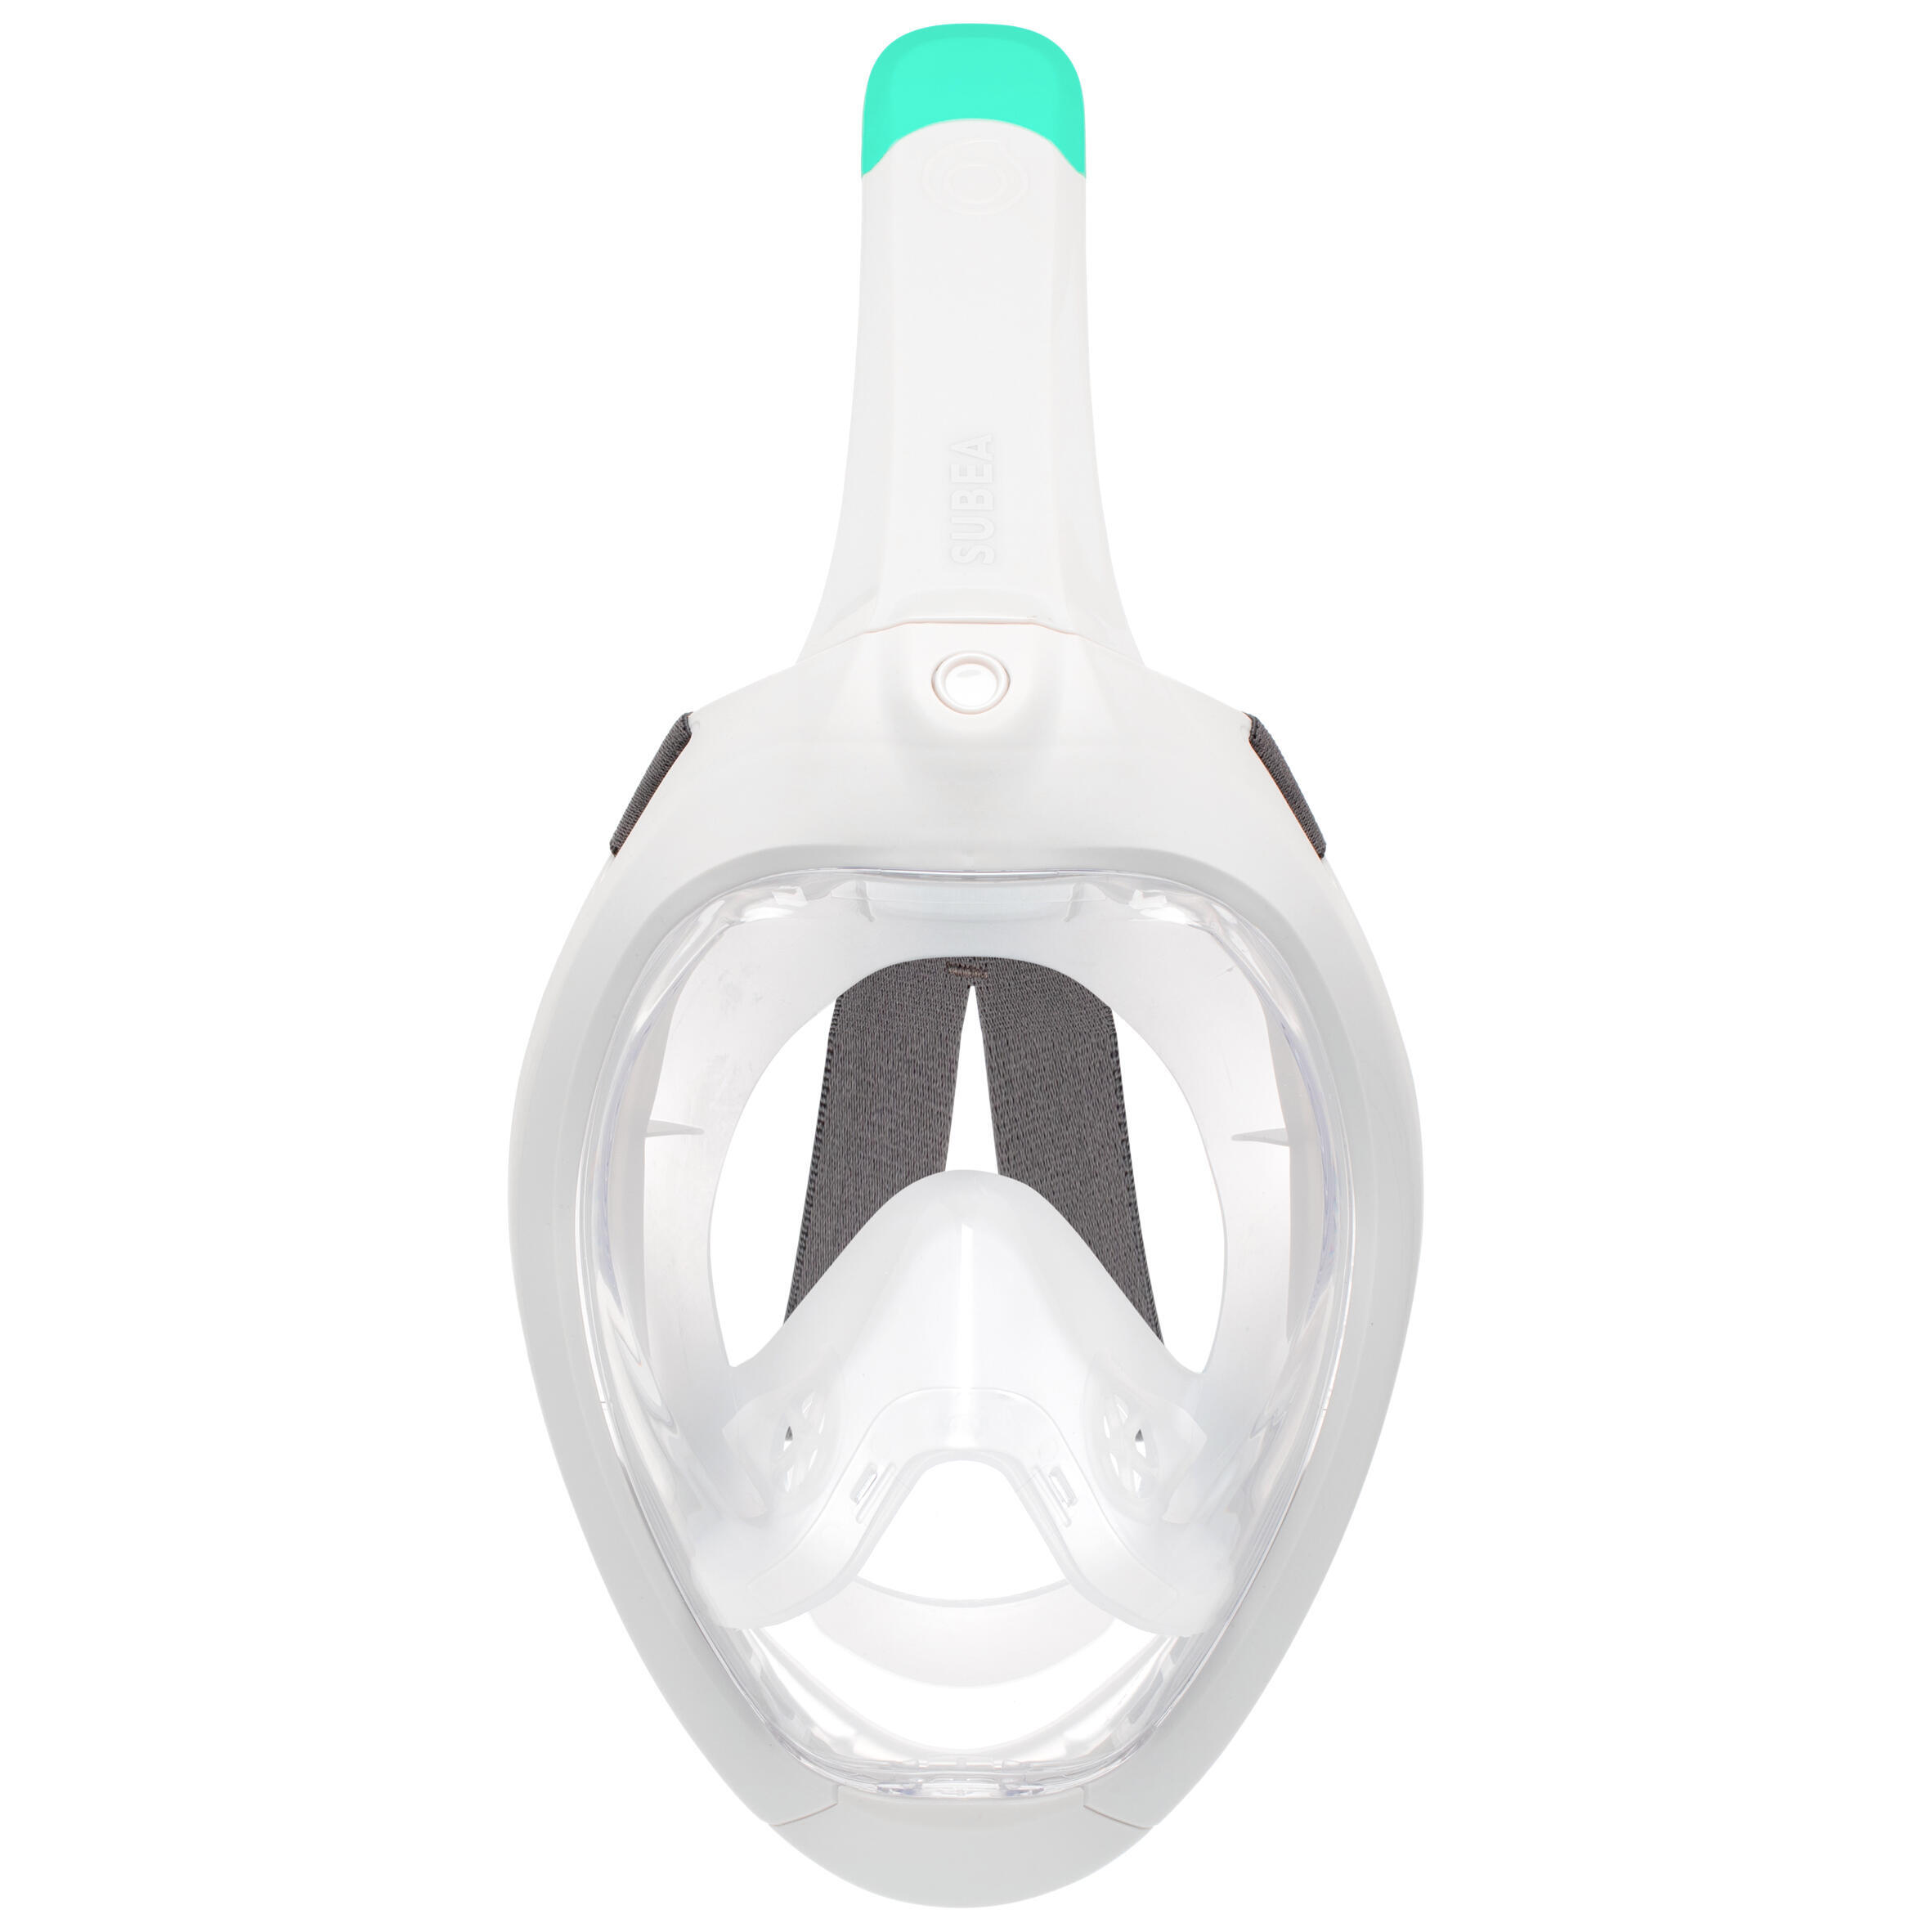 Adult’s Easybreath Surface Mask - 500 Grey with bag 3/13